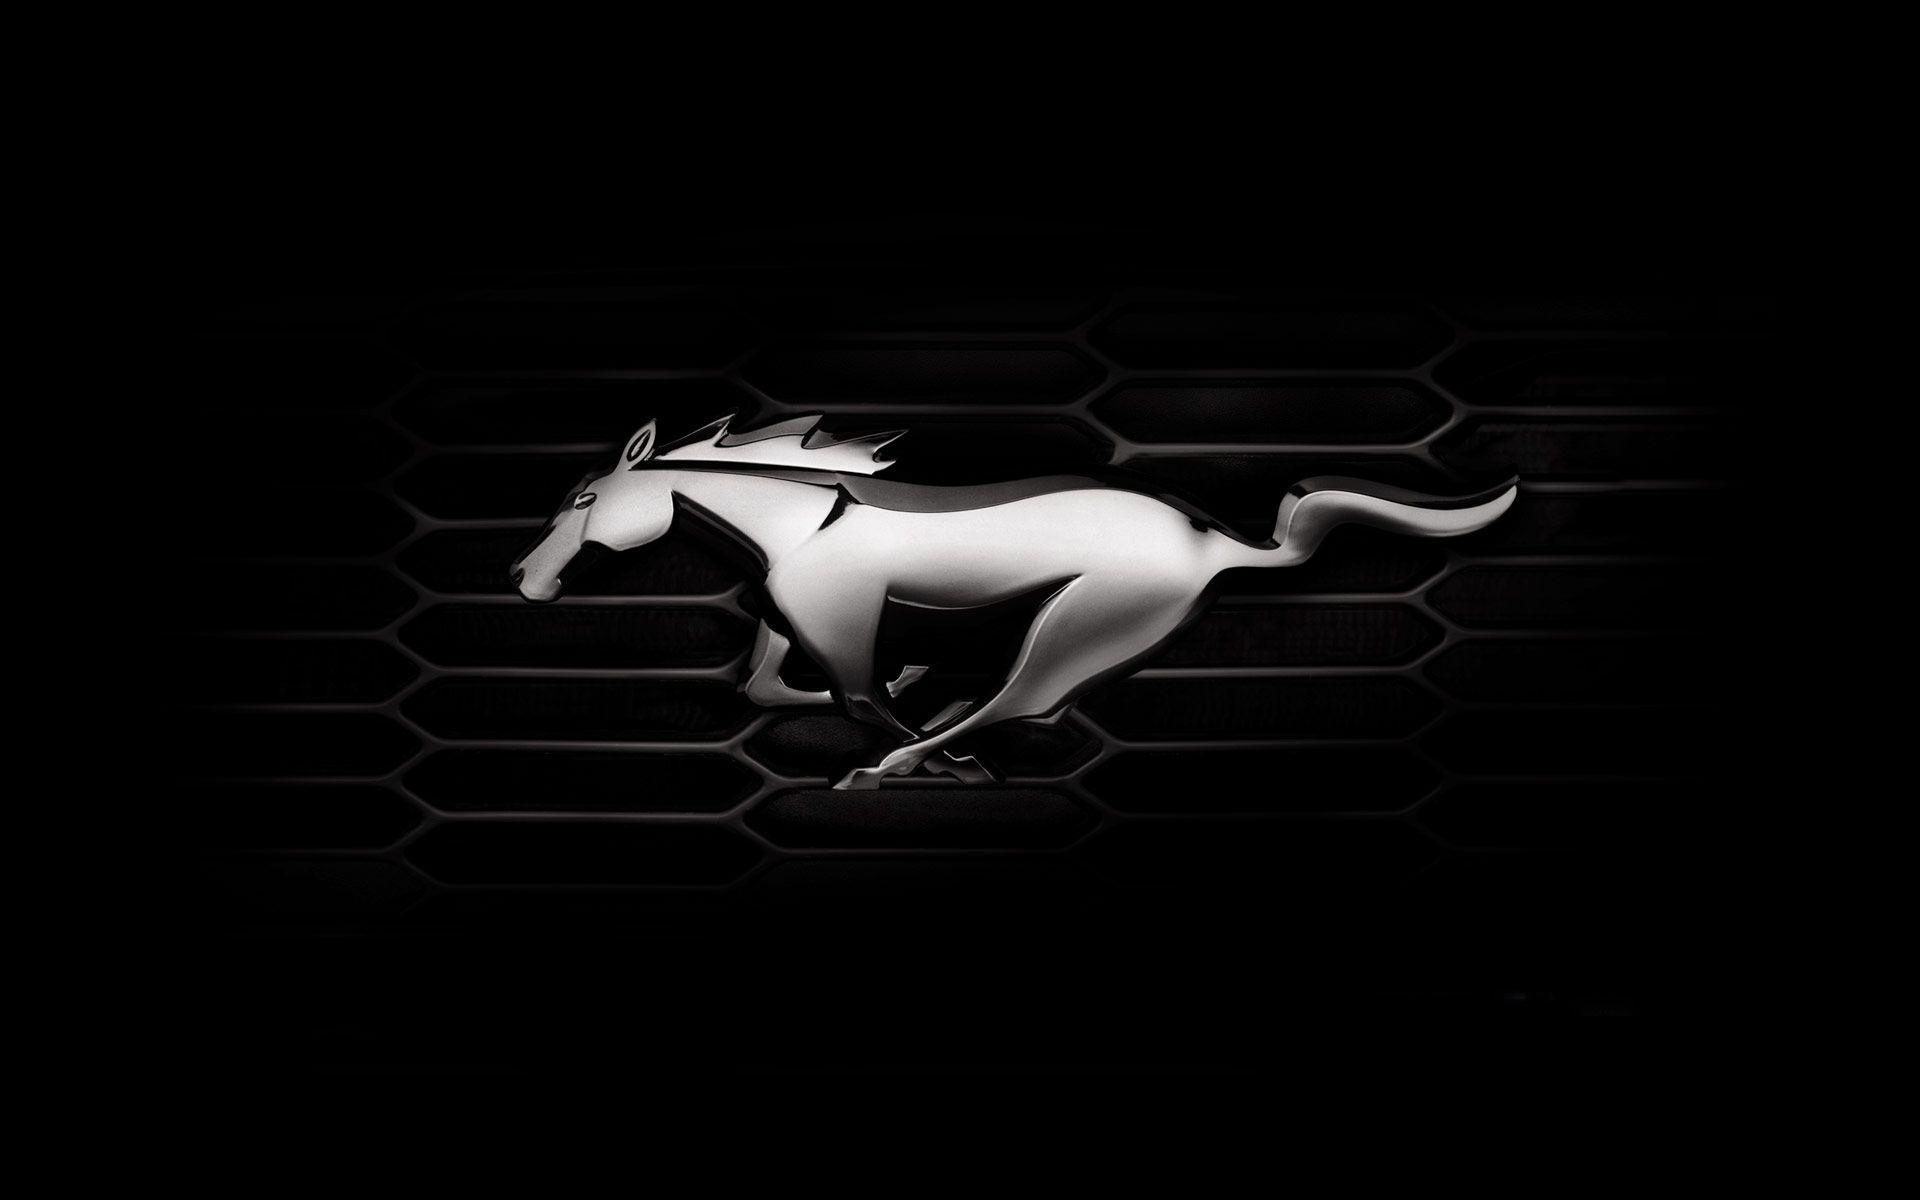 2014 Ford Mustang Emblem Wallpapers Wide or HD